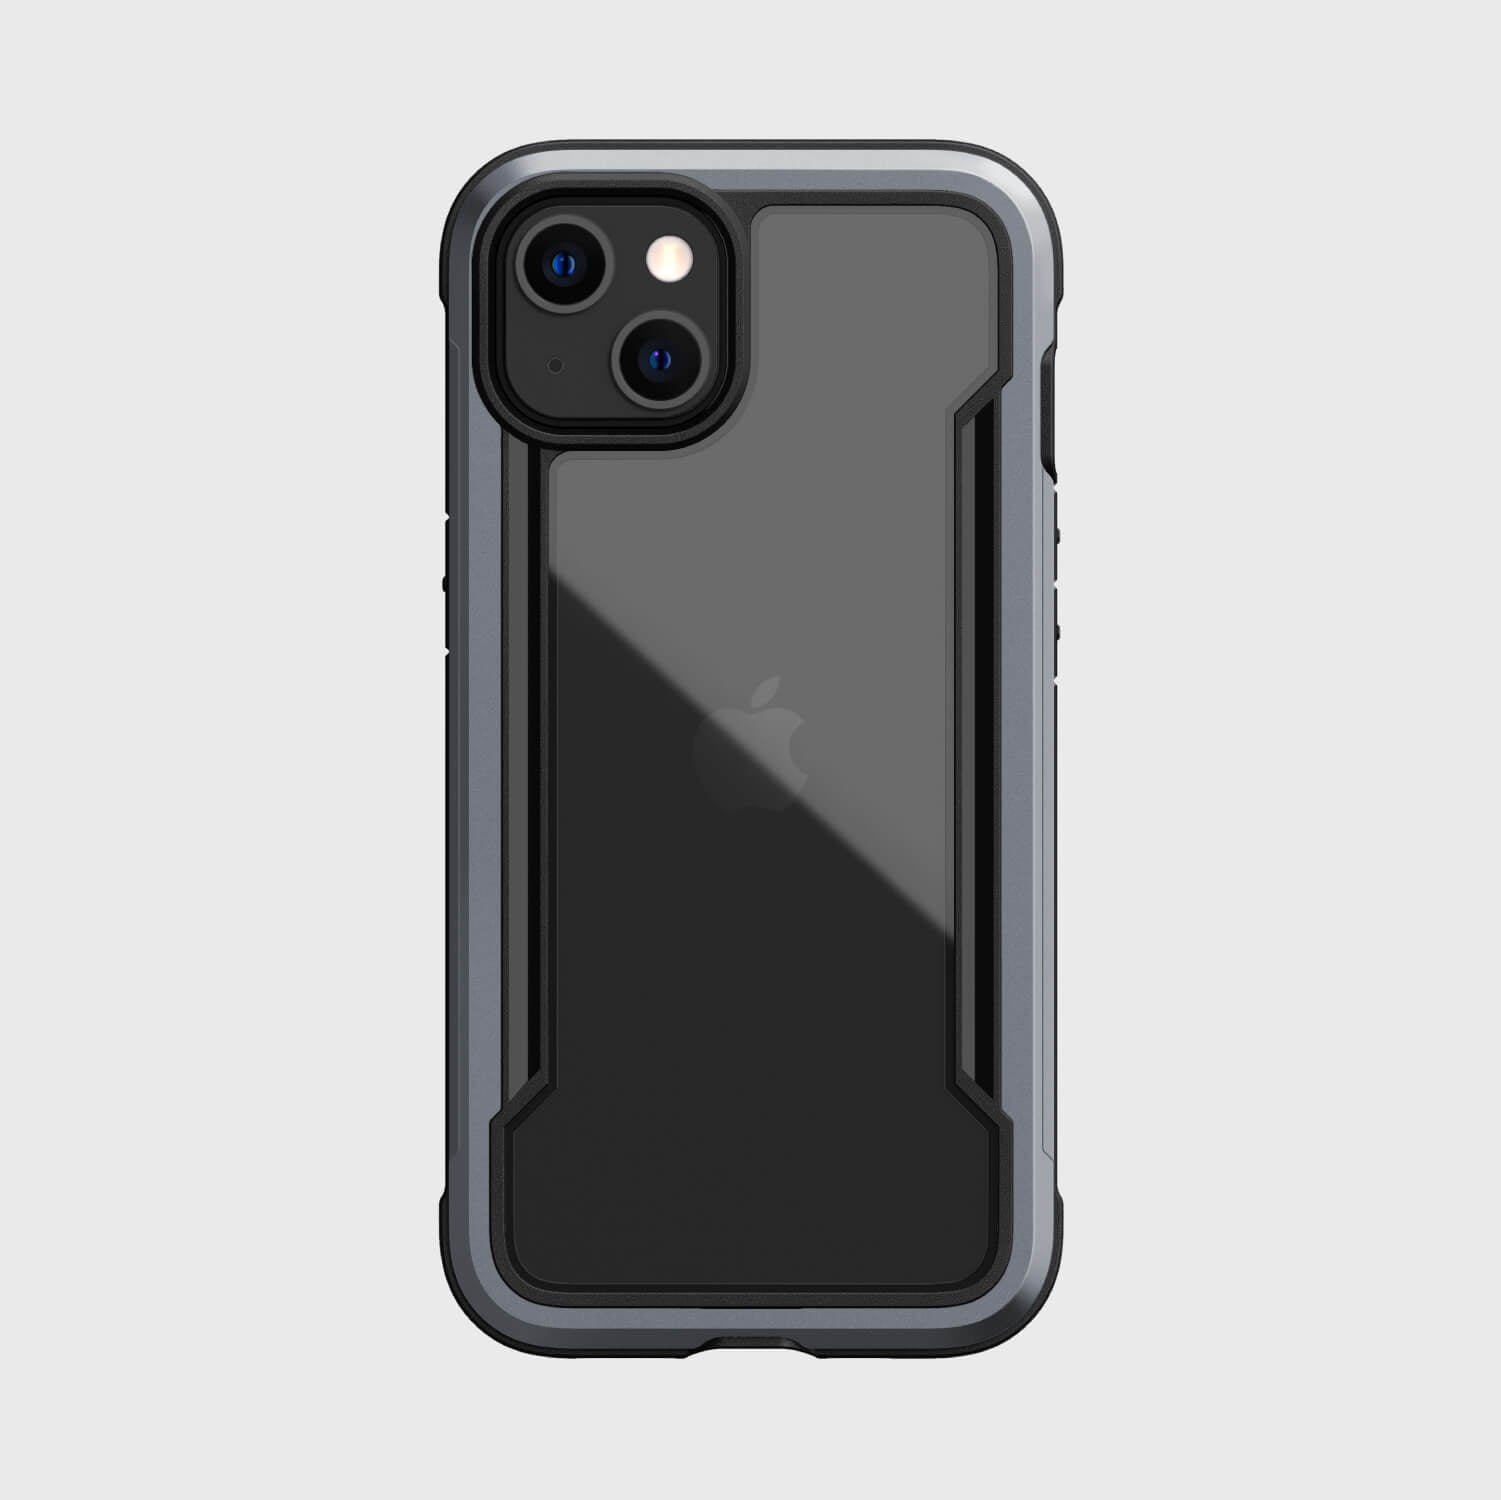 The back view of an iPhone 13 Case - SHIELD PRO by Raptic offering drop protection.